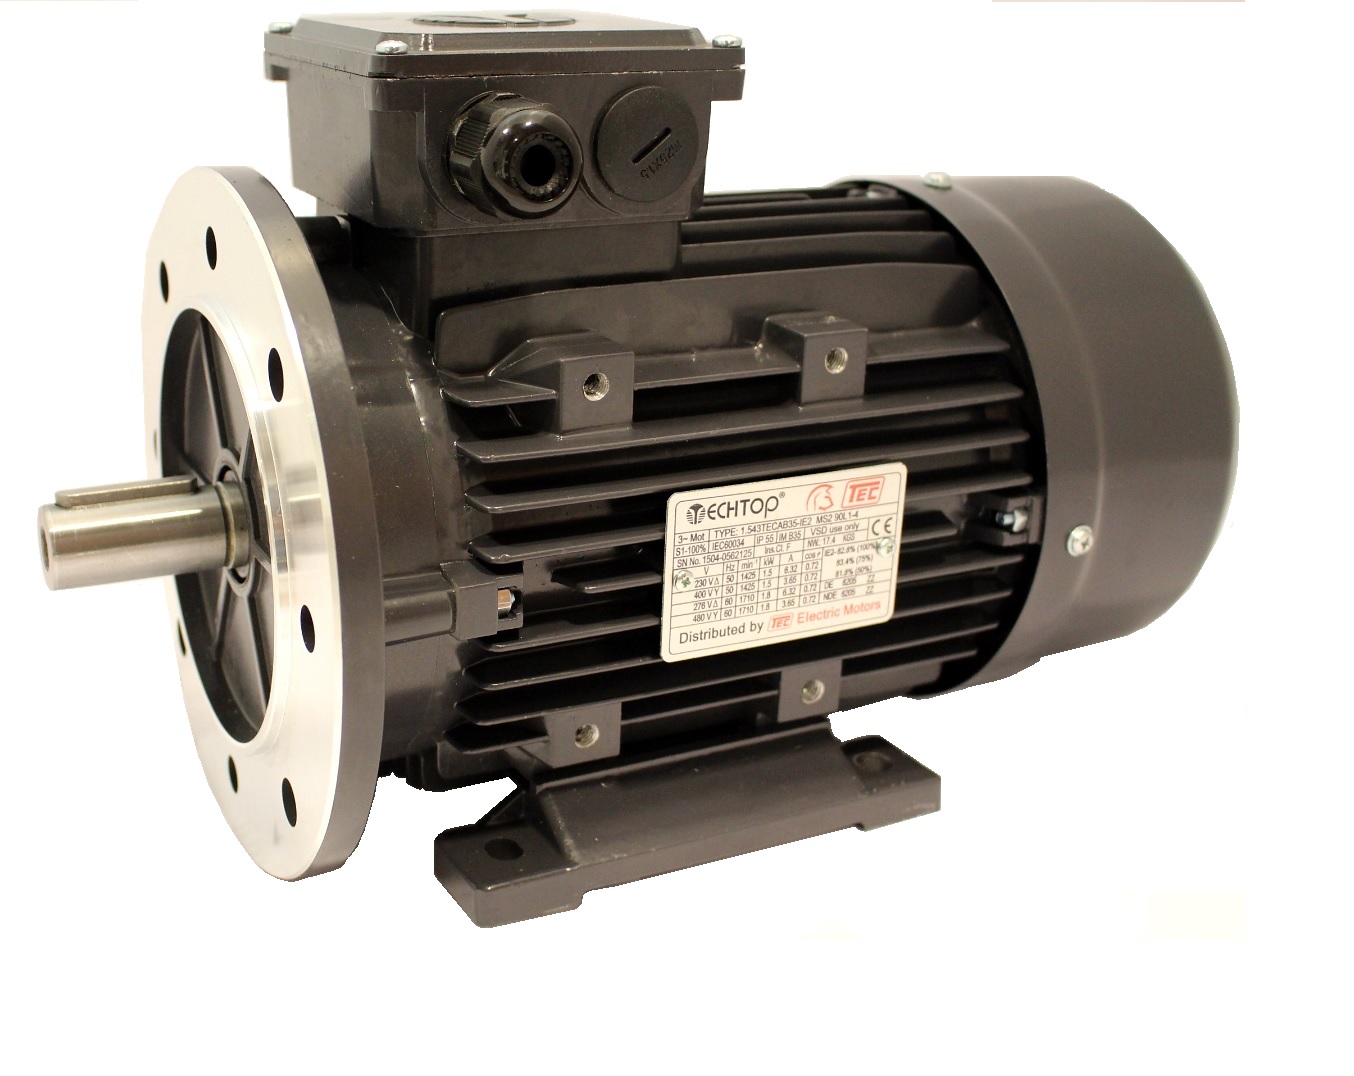 Two Phase 400v Electric Motor, 5.5Kw 4 pole 1500rpm with flange and foot mount IE2